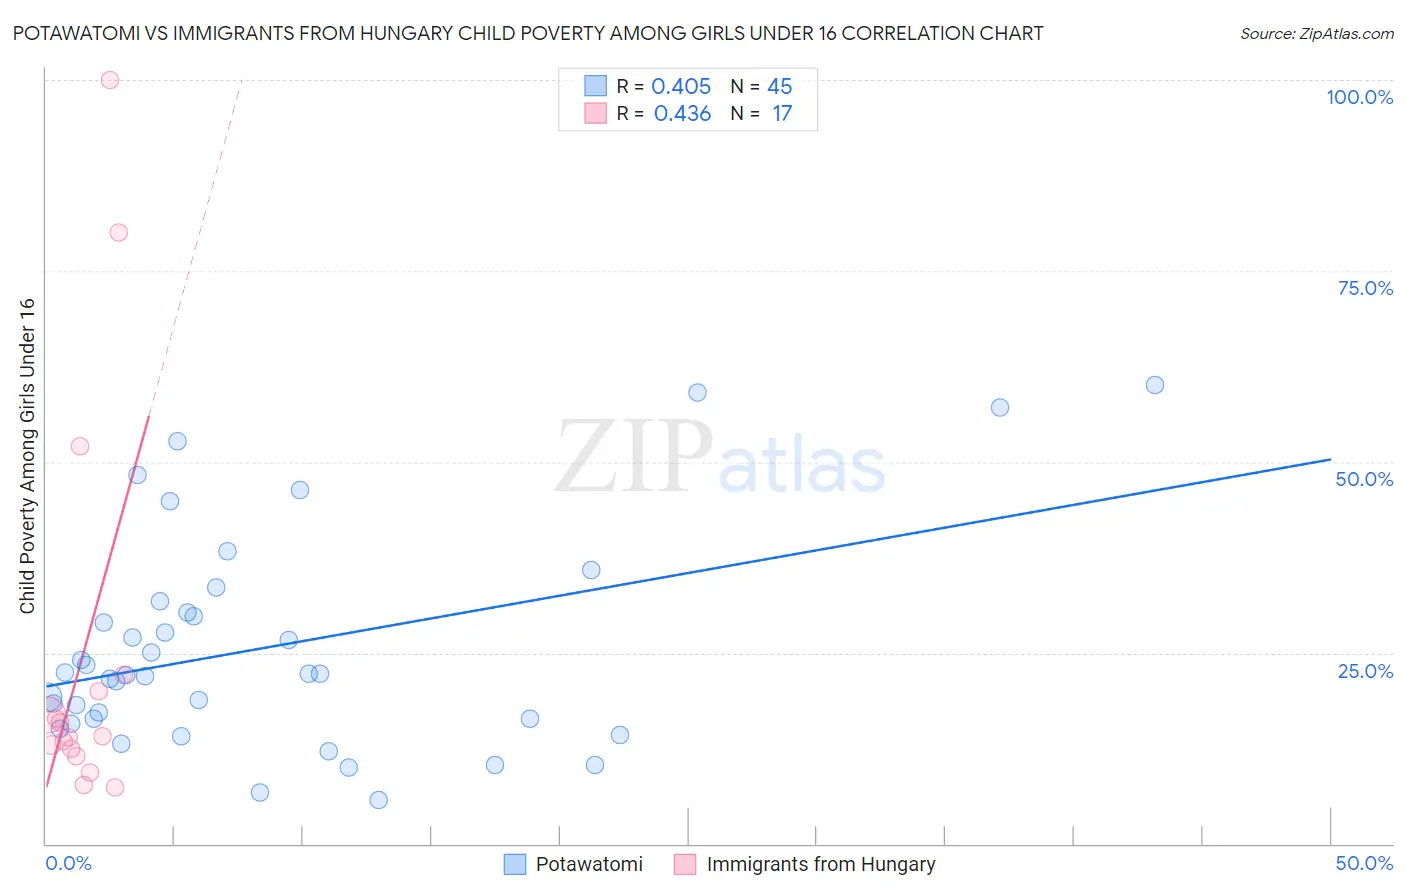 Potawatomi vs Immigrants from Hungary Child Poverty Among Girls Under 16